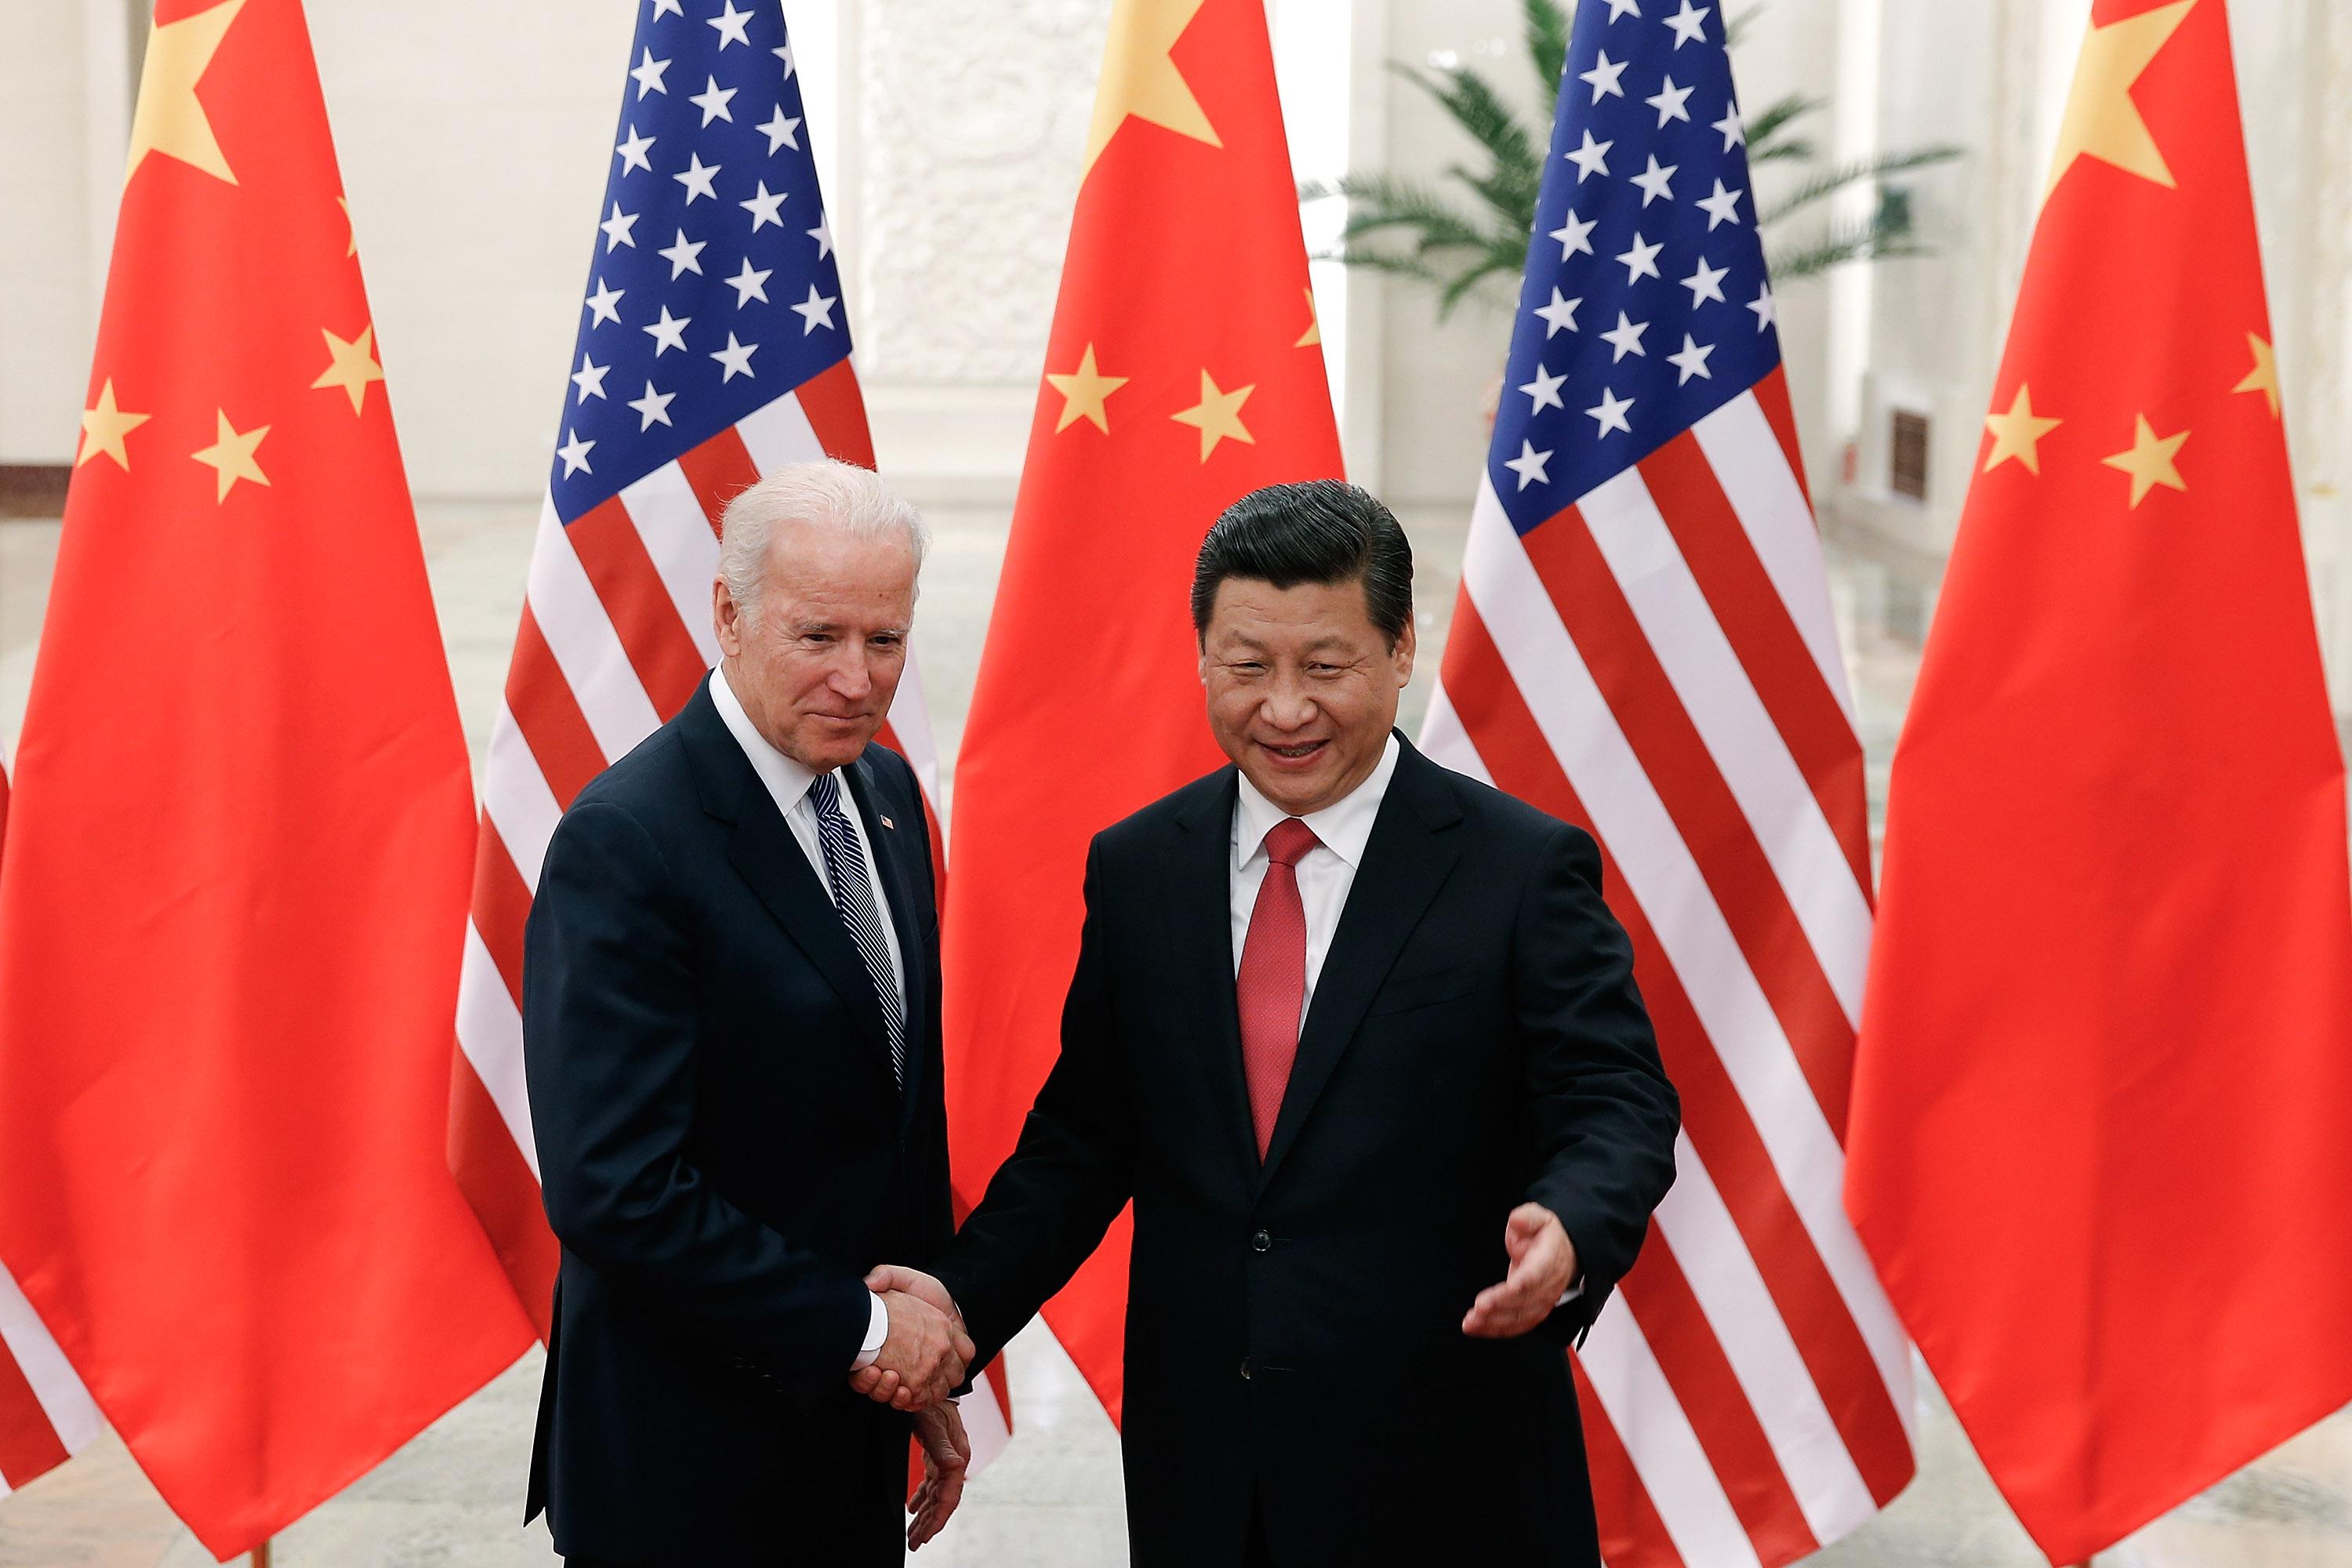 Biden and Xi shaking hands in front of U.S. and Chinese flags